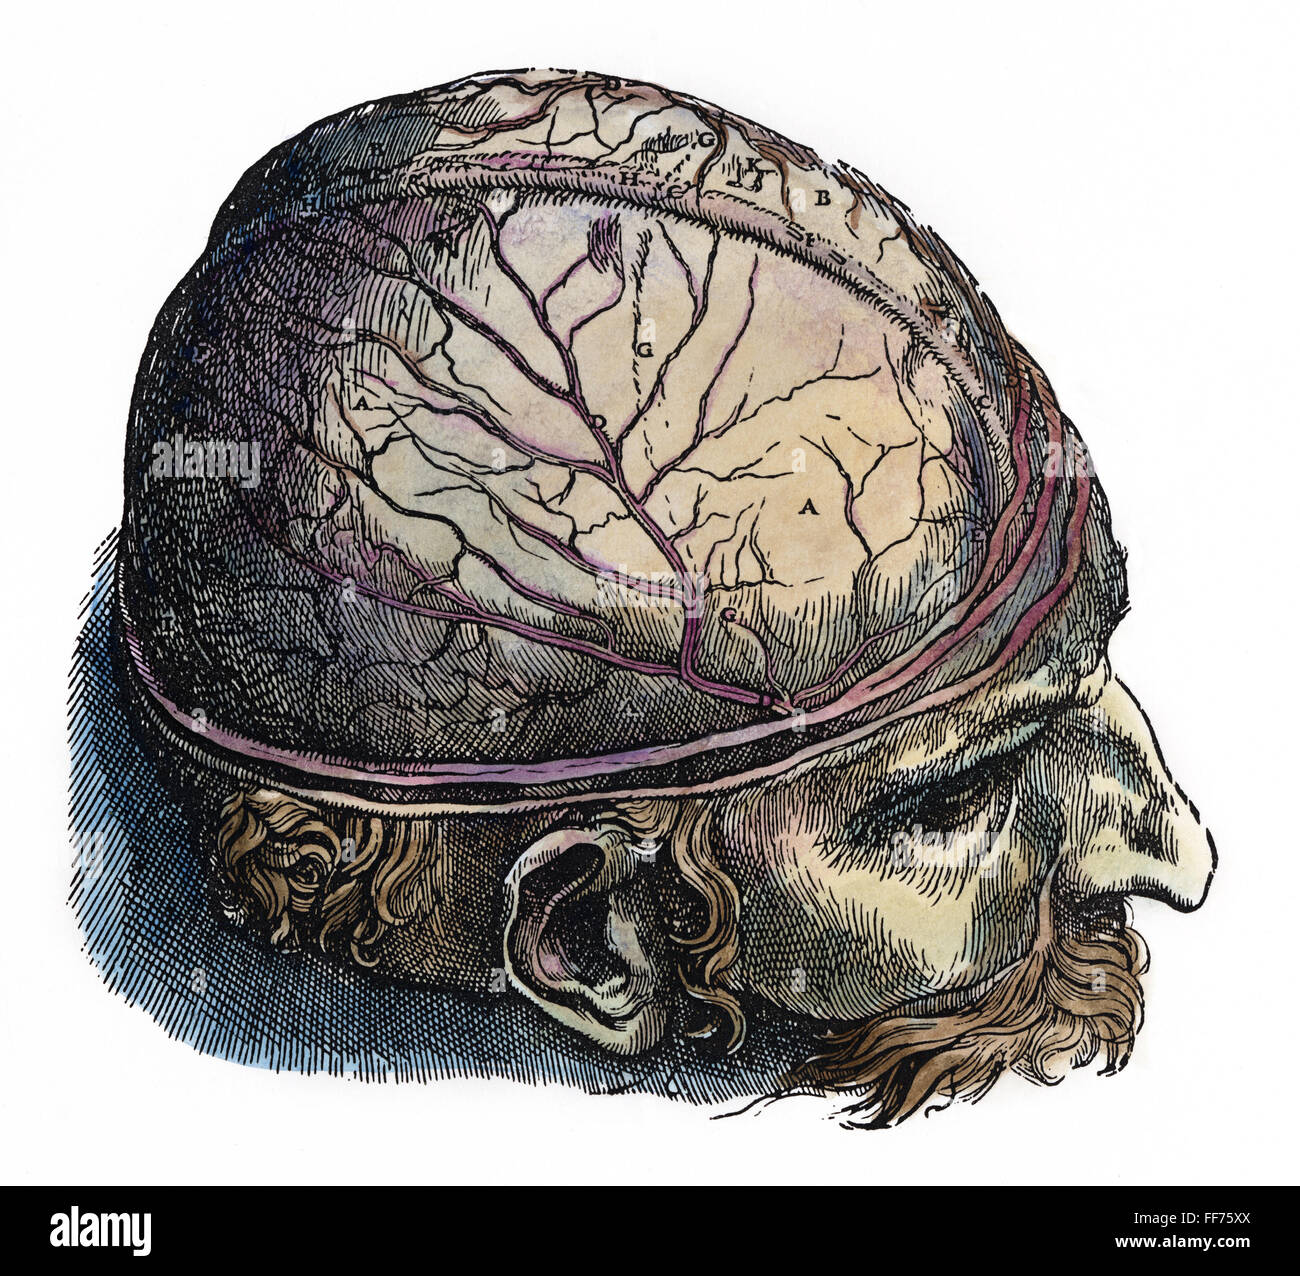 VESALIUS: CRANIUM. /nDissection of the Cranium. Colored woodcut from the seventh book of Andreas Vesalius' 'De Humani Corporis Fabrica,' published in 1543 at Basel. Stock Photo